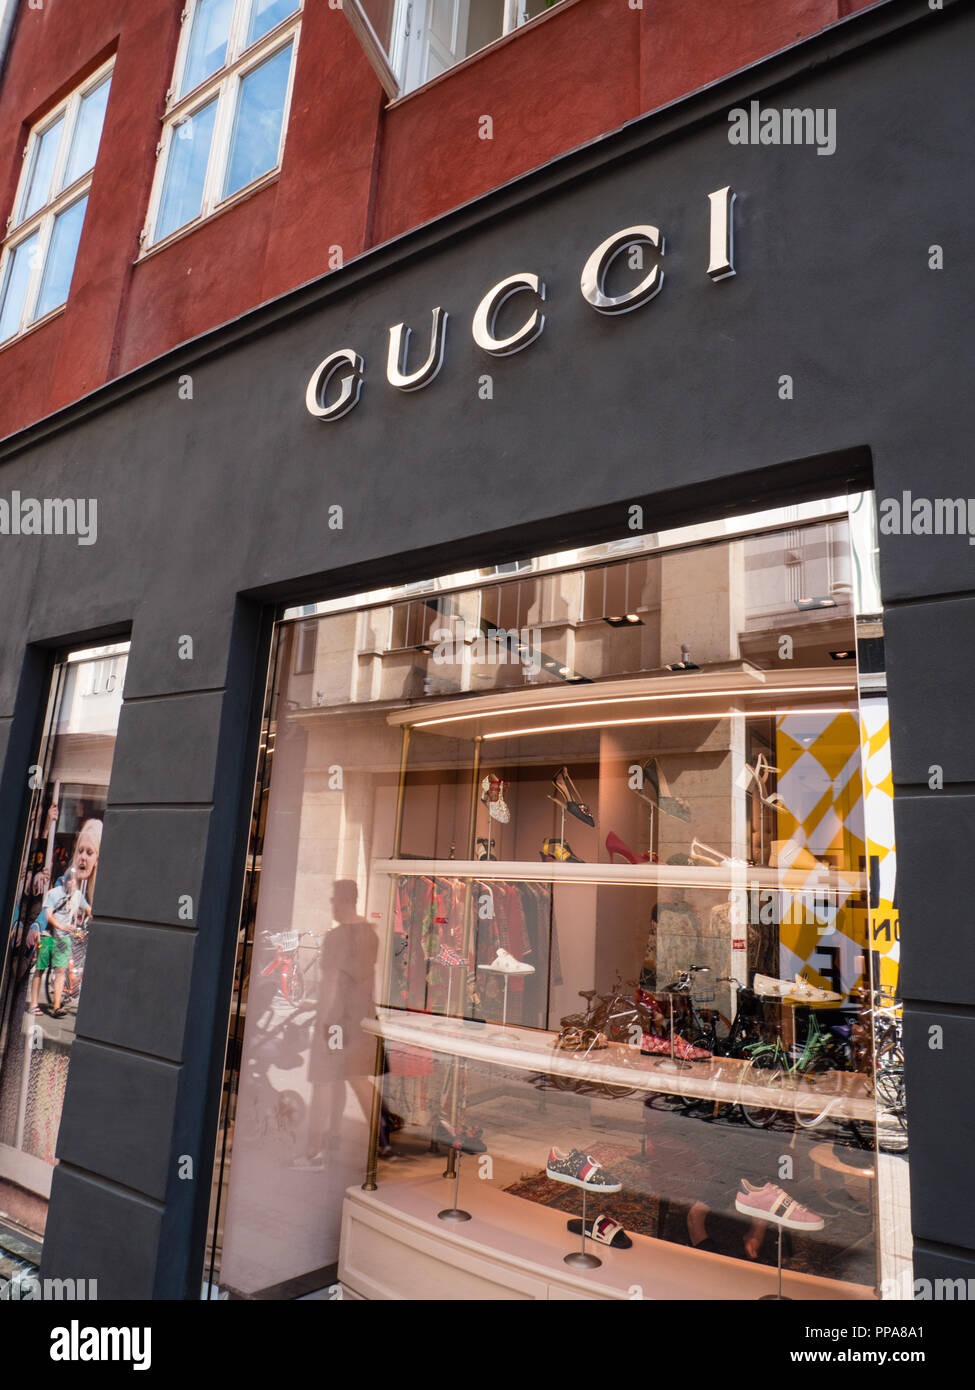 Gucci Retail Store High Resolution Stock Photography and Images - Alamy